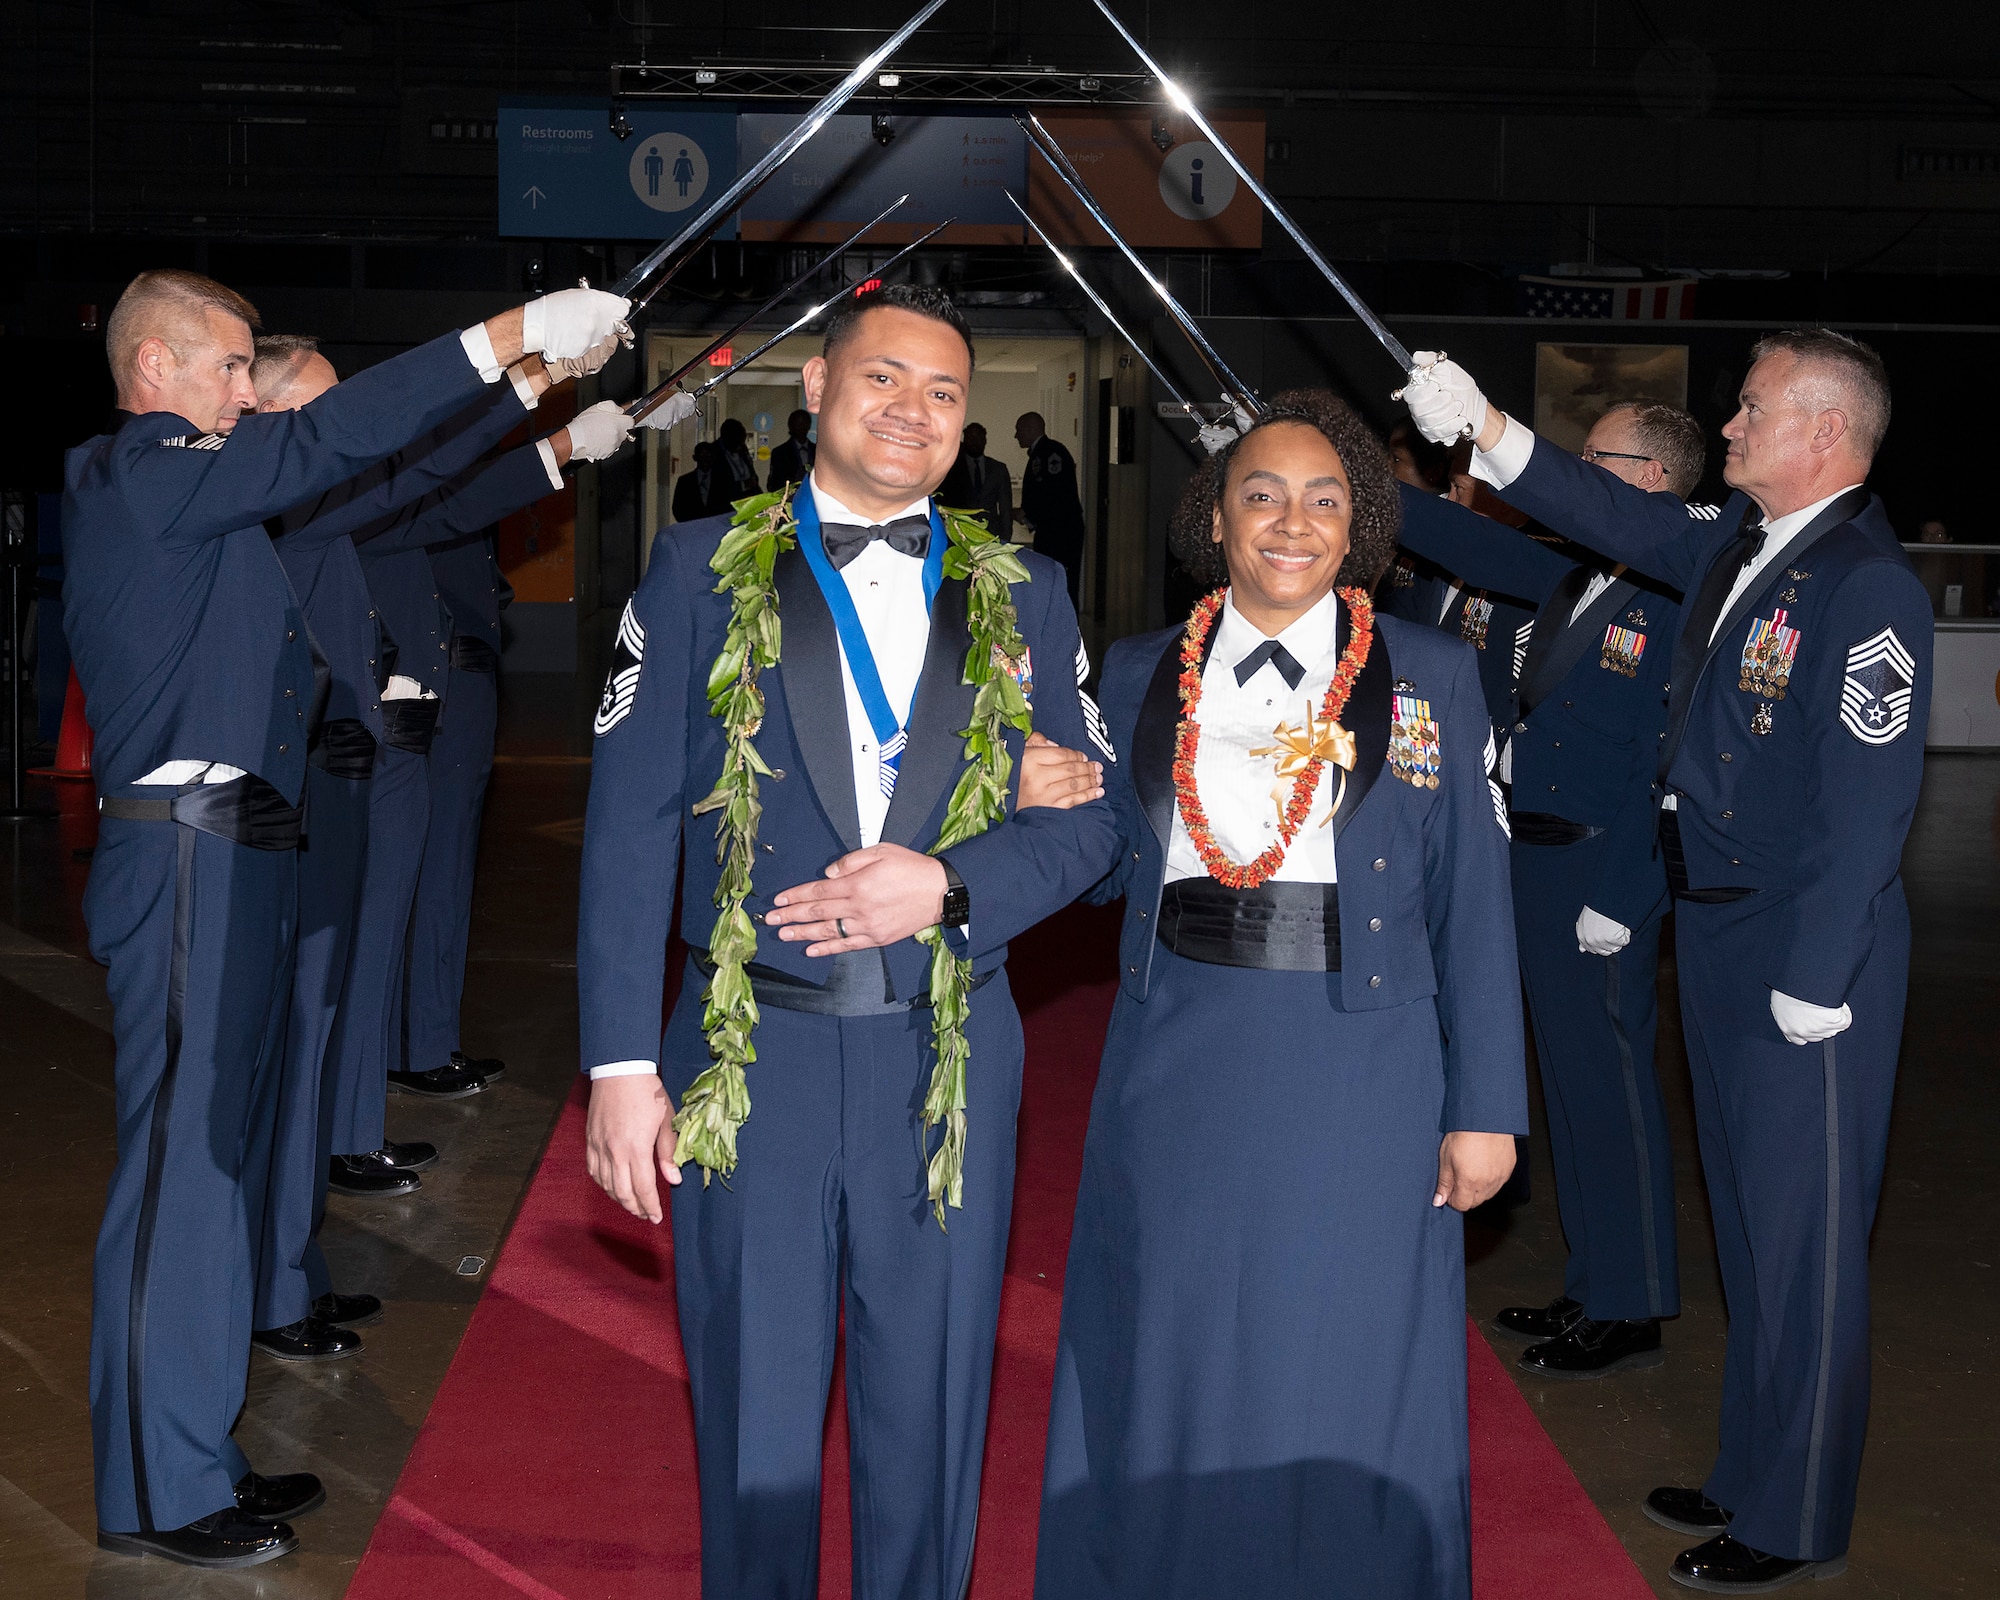 Chief Master Sgt. Derek Maiava and his wife, Chief Master Sgt. Selena Maiava, pause after passing the saber cordon May 14, 2022, as they enter the Wright-Patterson Chief Master Sergeant Recognition Ceremony at the National Museum of the U.S. Air Force. Derek Maiava was honored as one of the Wright-Patterson Airmen recently selected for promotion to the Air Force’s highest enlisted rank. (U.S. Air Force photo by R.J. Oriez)